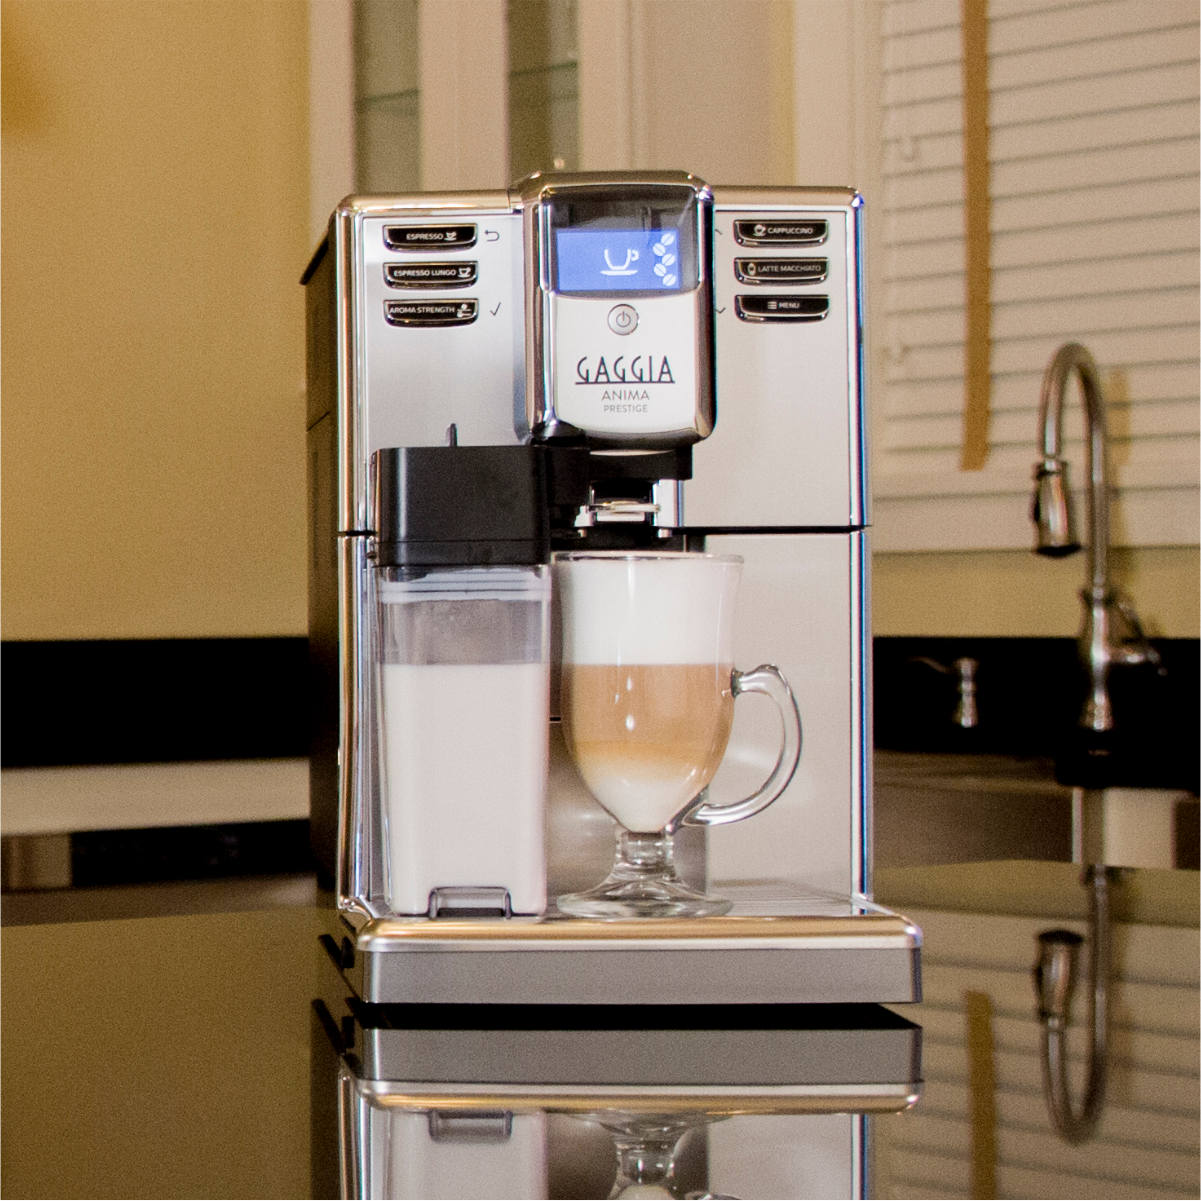 Not only does the Gaggia Anima Prestige deliver superior performance, but it also boasts a compact design that seamlessly fits onto any kitchen countertop, adding convenience and style to your space. Its user-friendly interface ensures easy navigation, allowing you to personalize the machine's settings to suit your preferences.